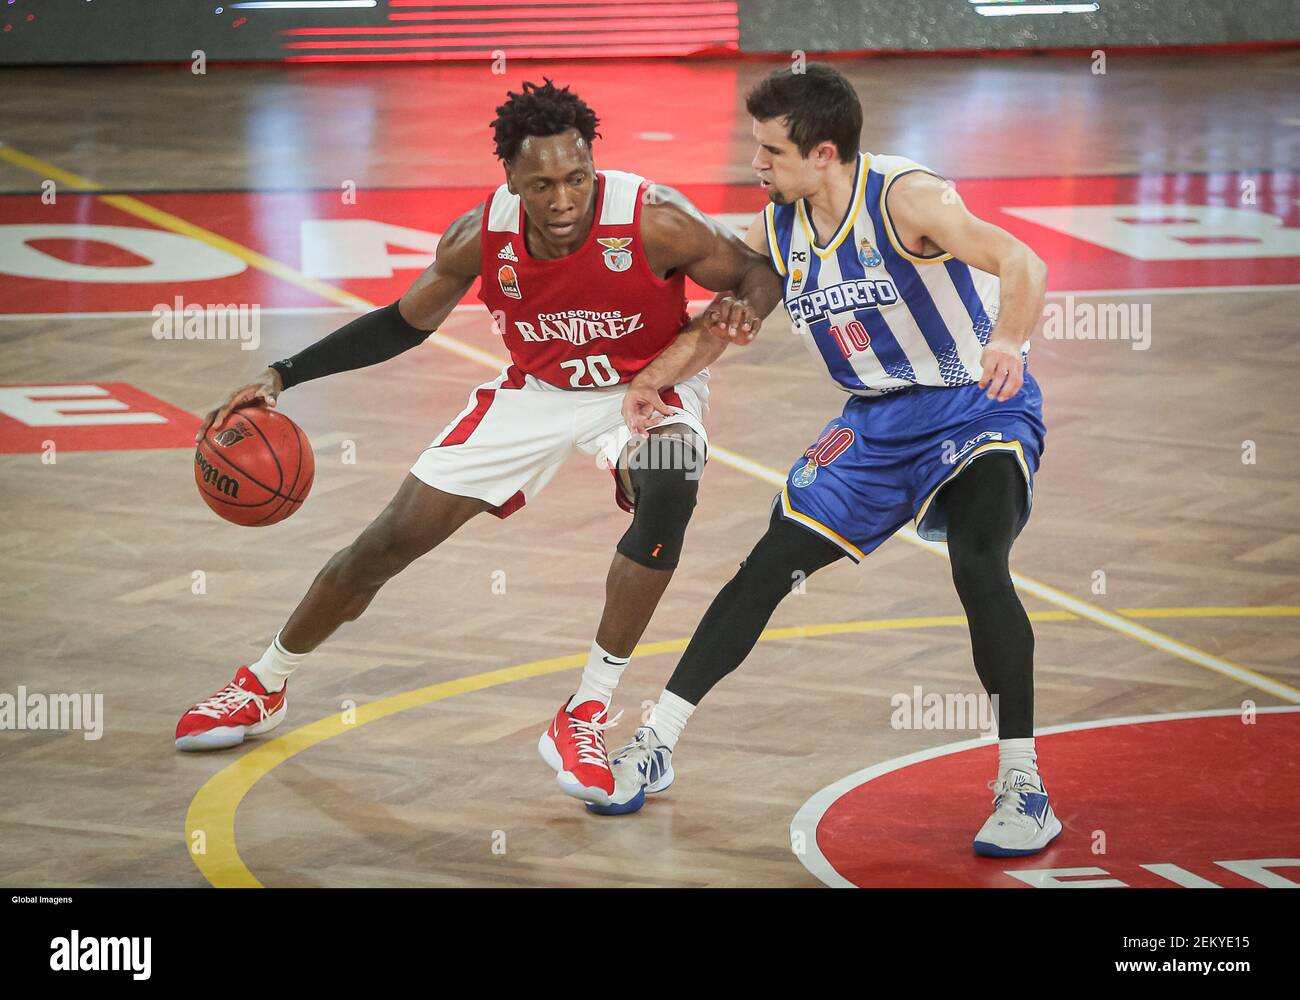 Lisbon, 11/7/2020 - Sport Lisboa e Benfica hosted this afternoon at the  Fidelidade pavilion at EstÃƒÂ¡dio da Luz, FC.Porto in the game of the 6th  round of the LPB Placard Basketball 2020/21.